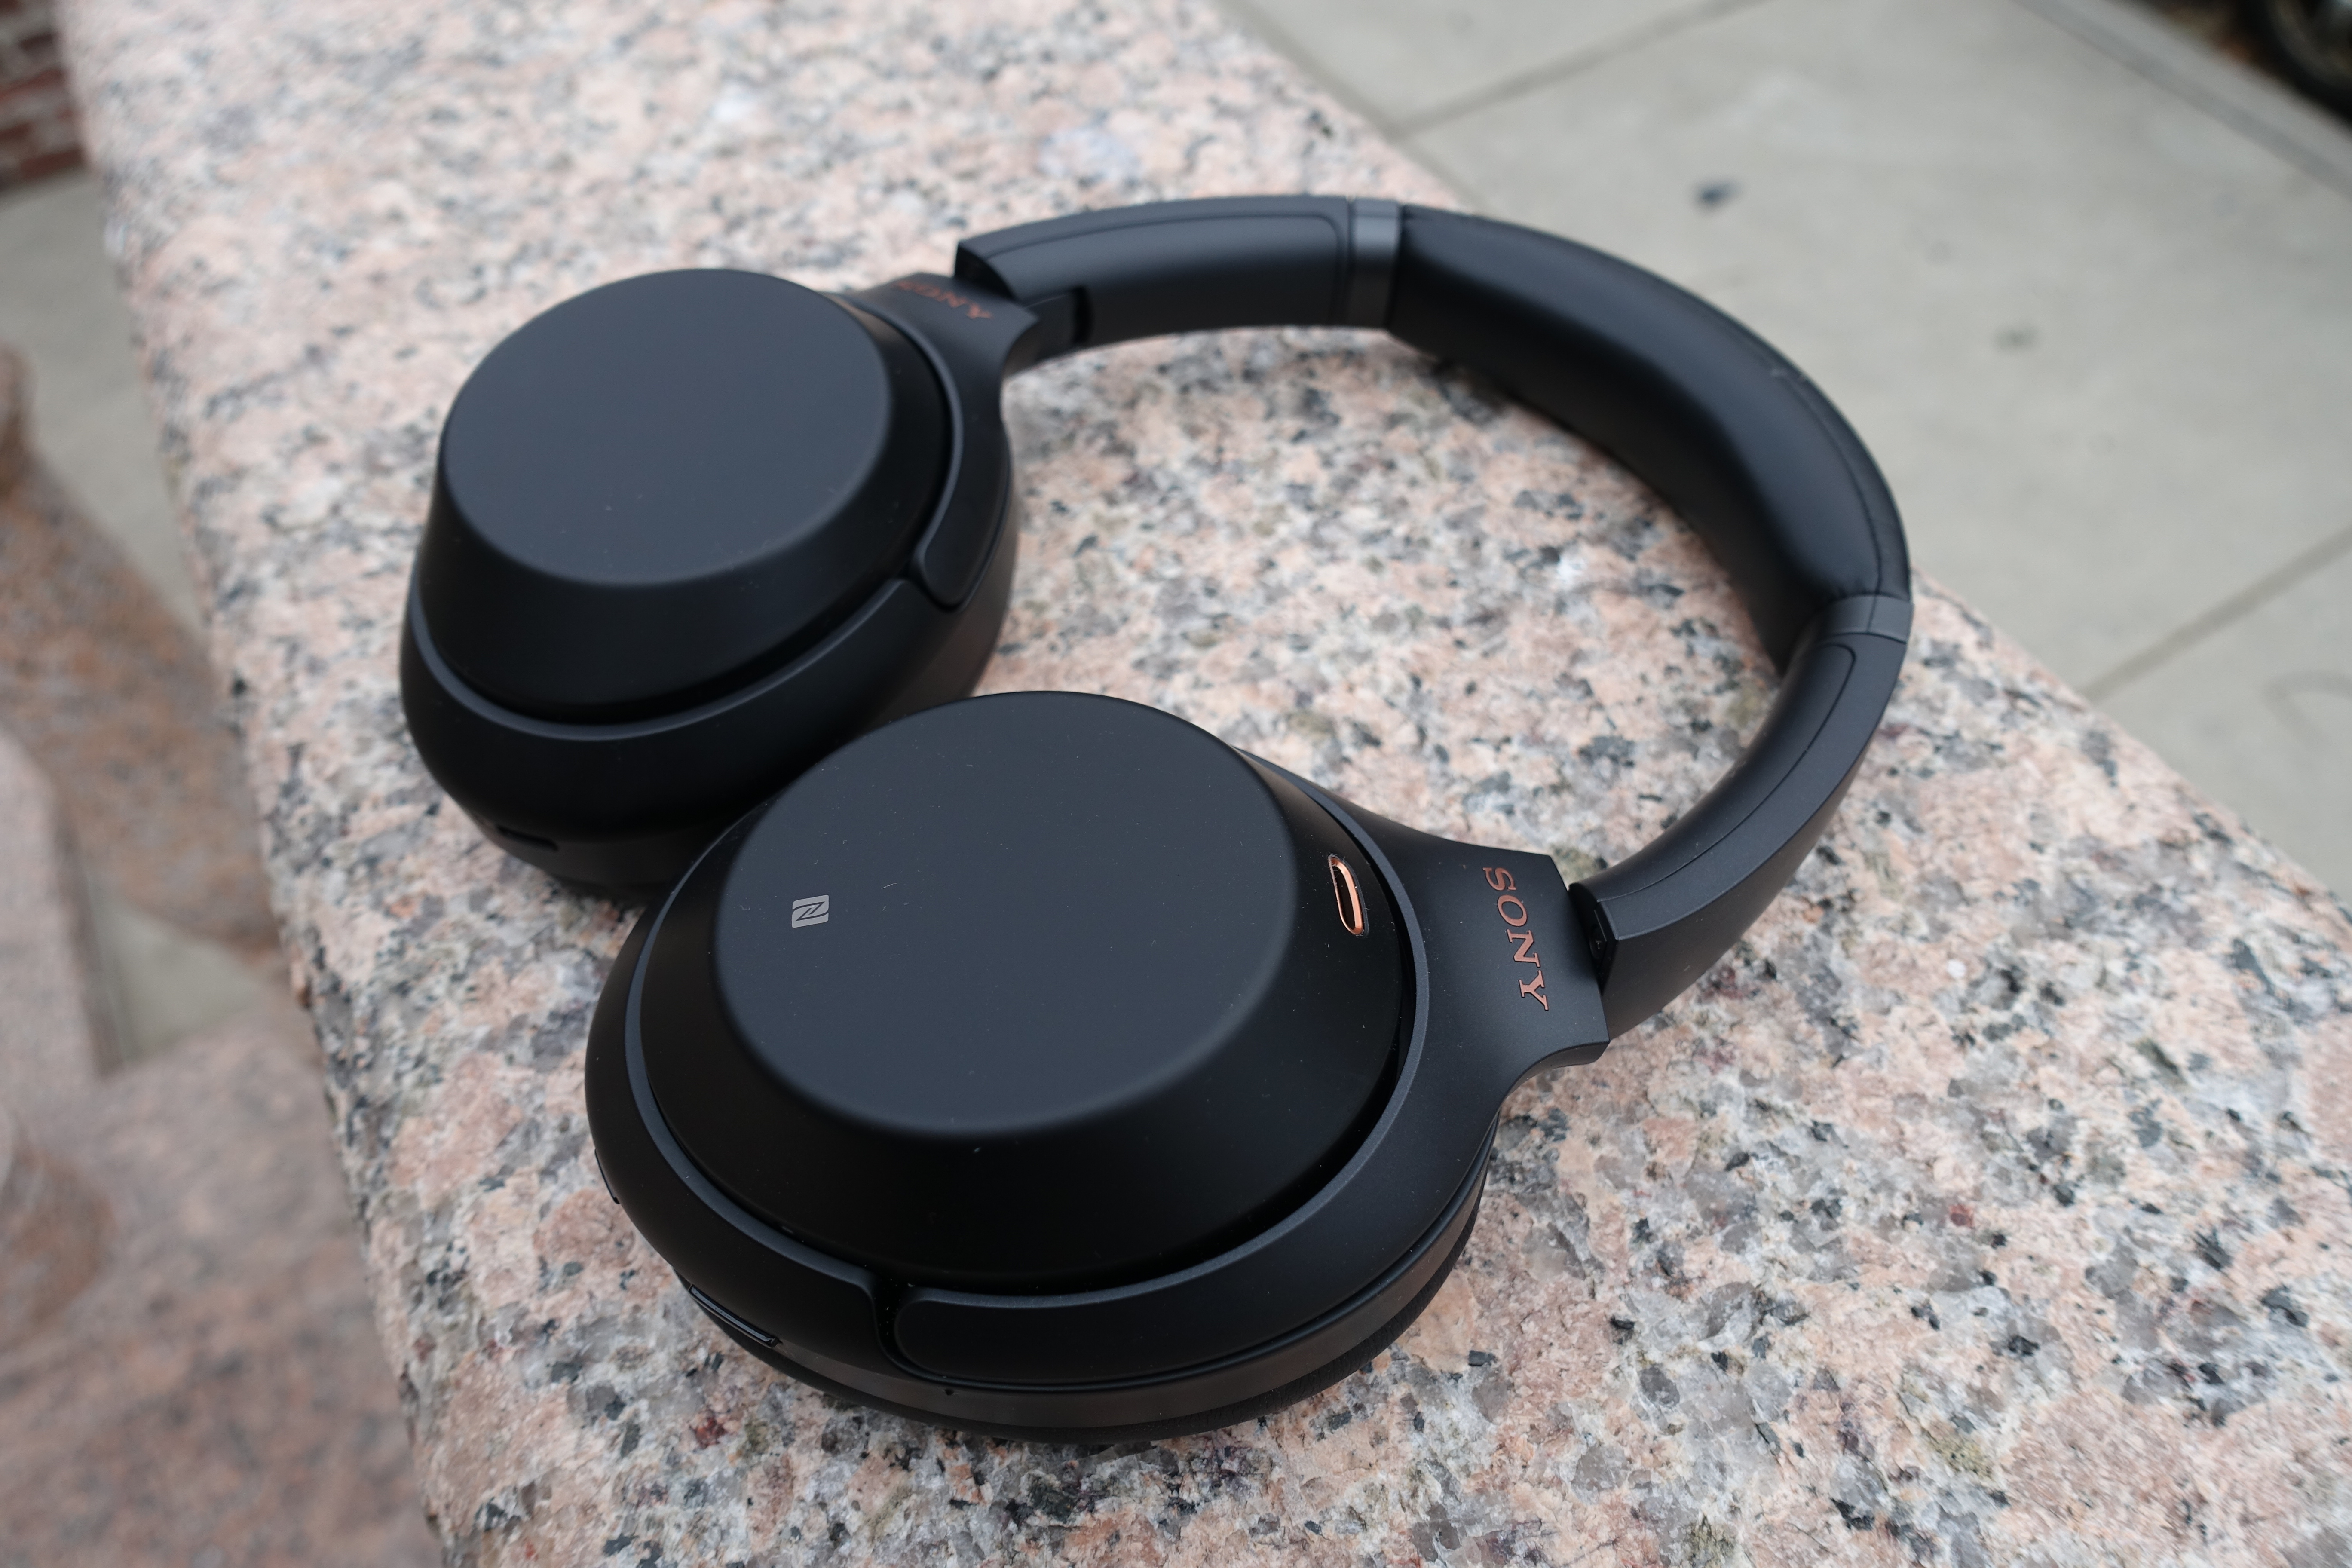 The Best On-Ear Wireless Headphones From $100 to $400